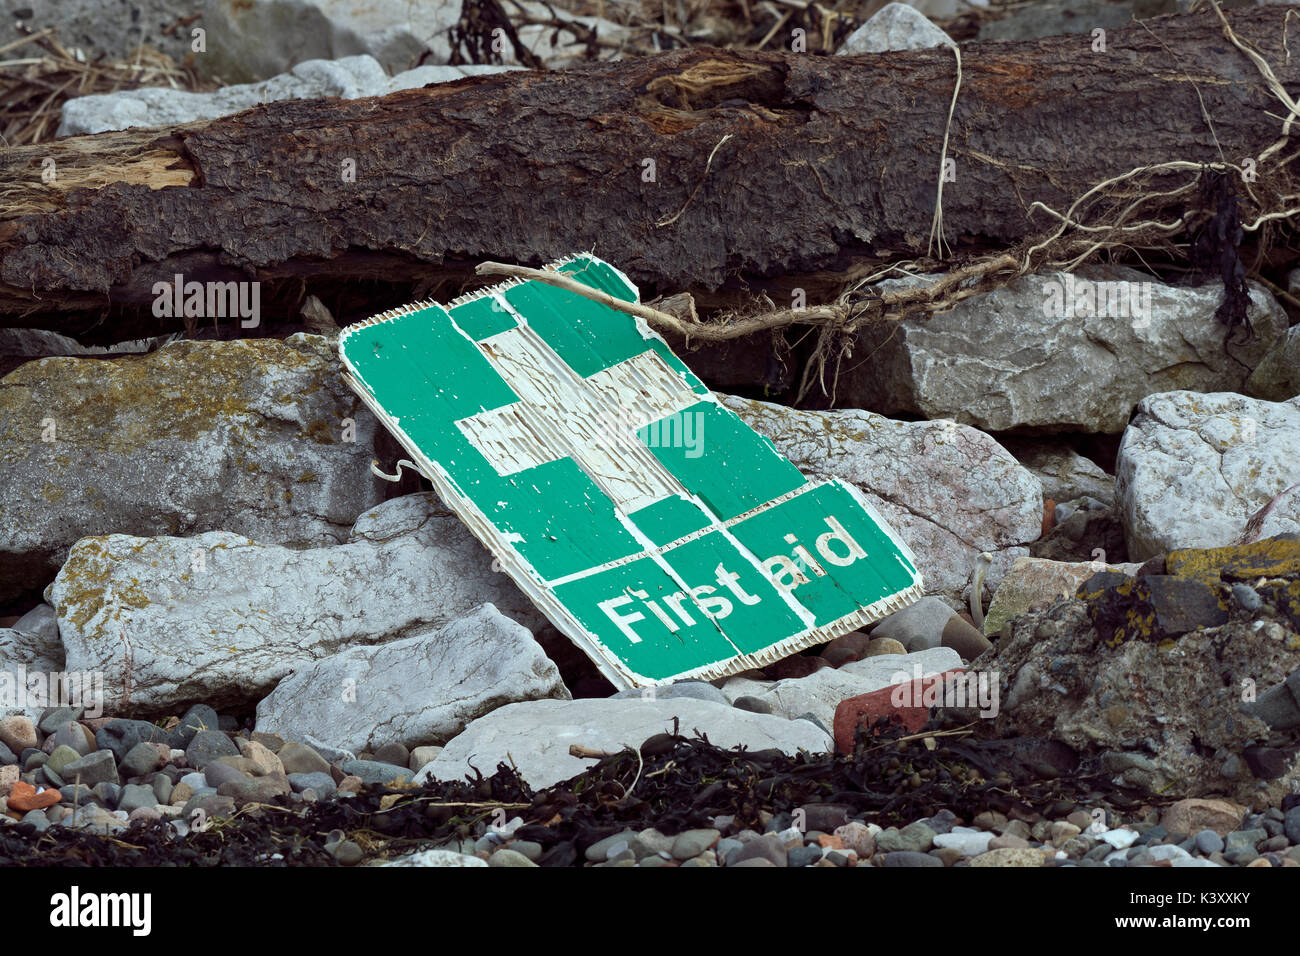 Plastic first aid sign washed up on beach in Lancashire Stock Photo